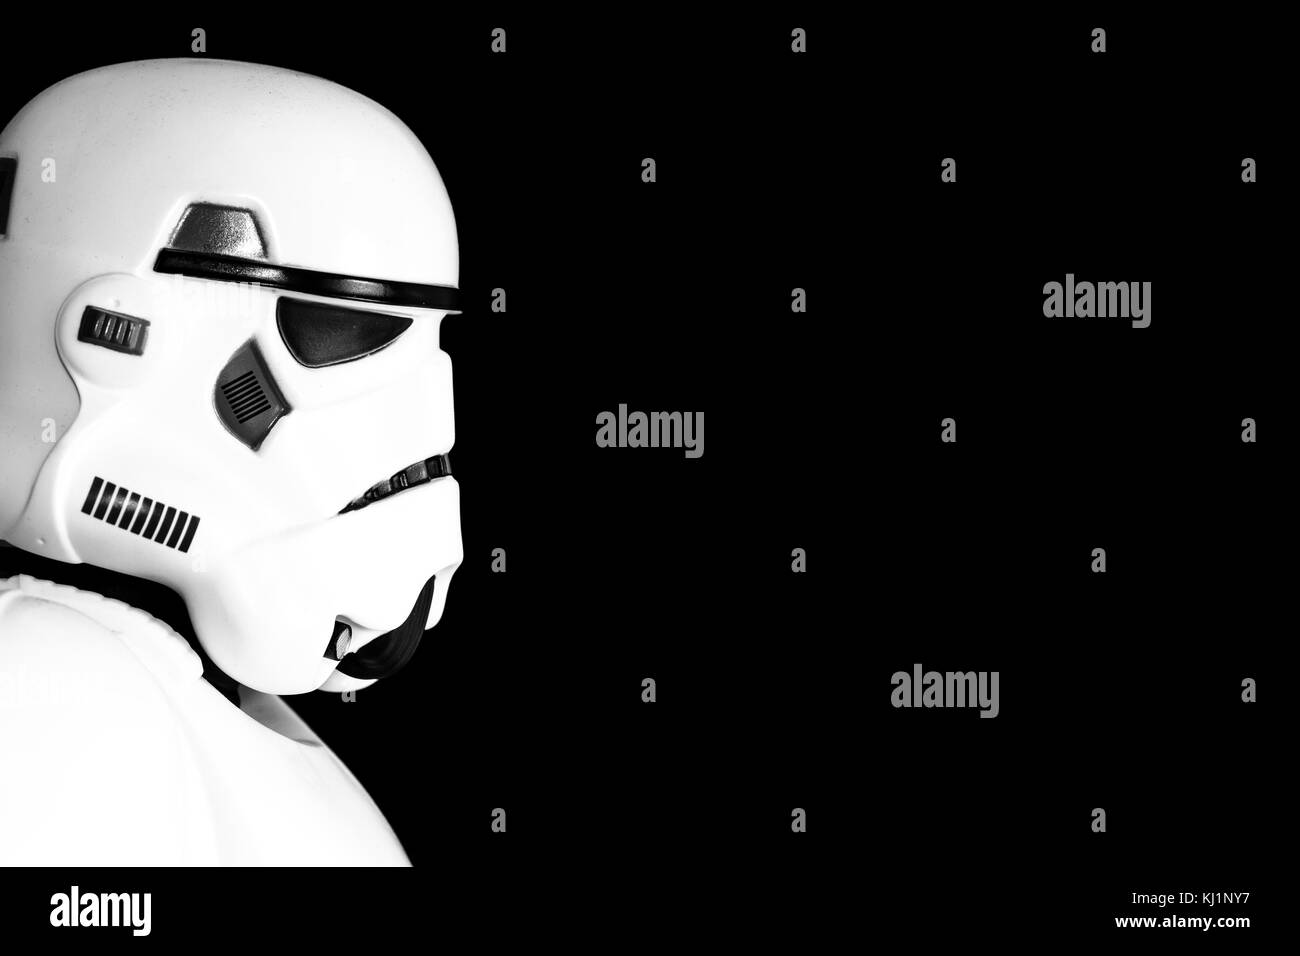 SELBY, UK - NOVEMBER 20, 2017.  The profile of a Stormtrooper from the Star Wars movies in profile and on a black background with copy space. Stock Photo